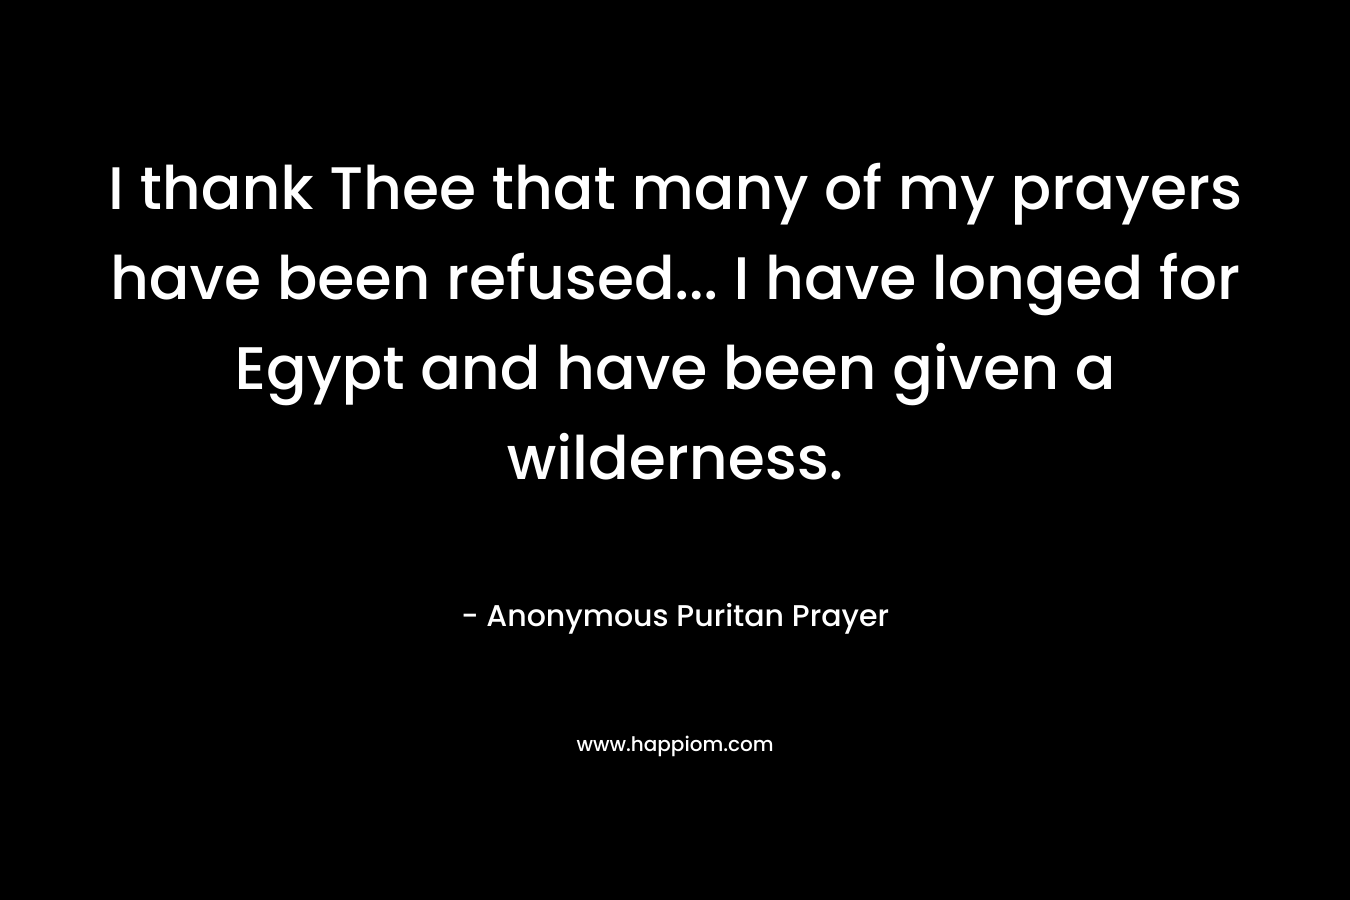 I thank Thee that many of my prayers have been refused… I have longed for Egypt and have been given a wilderness. – Anonymous Puritan Prayer